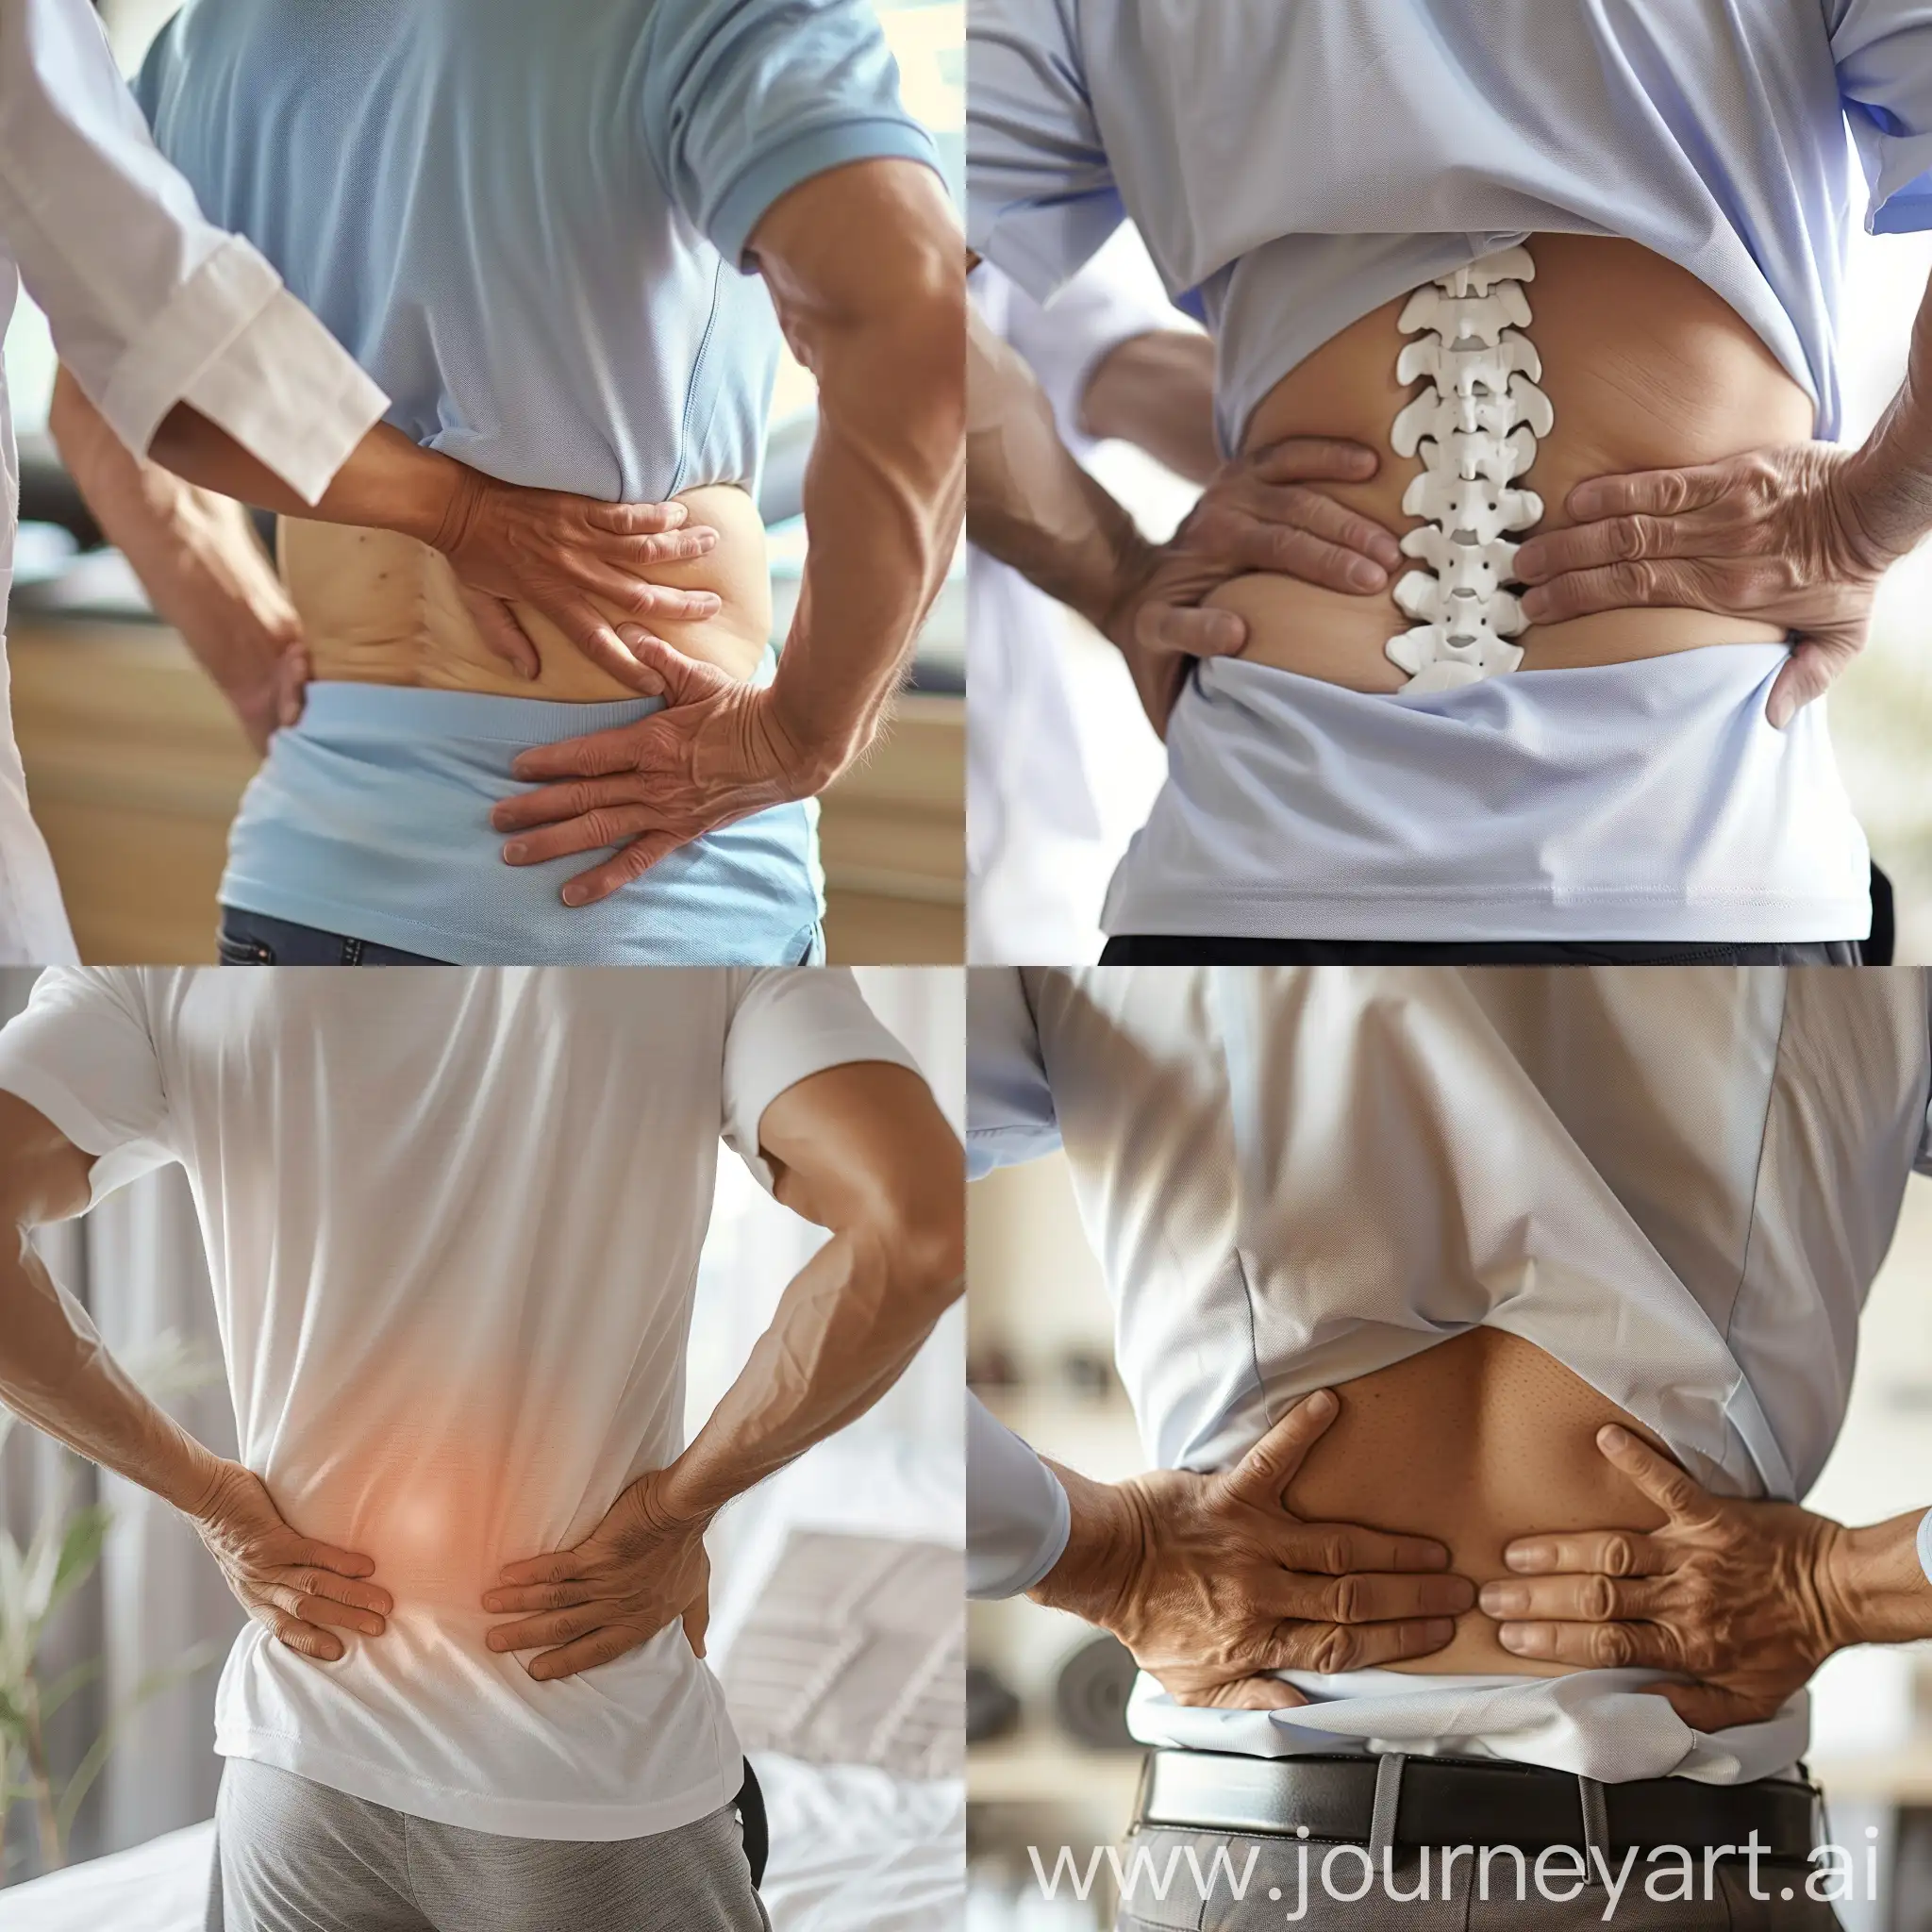 Physiotherapists-Treating-Low-Back-Pain-Patients